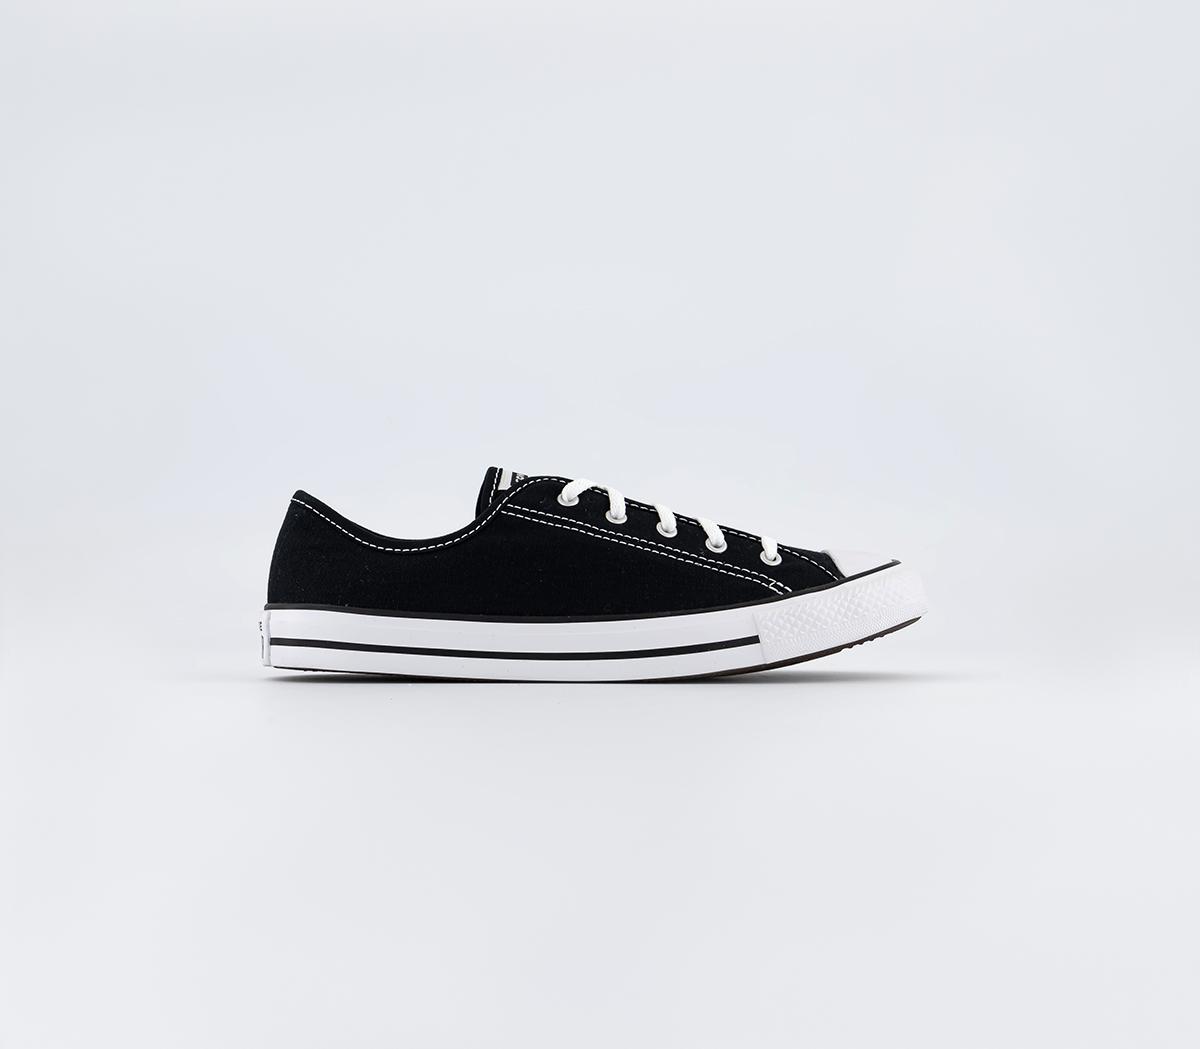 All Star Dainty Trainers Black White Black